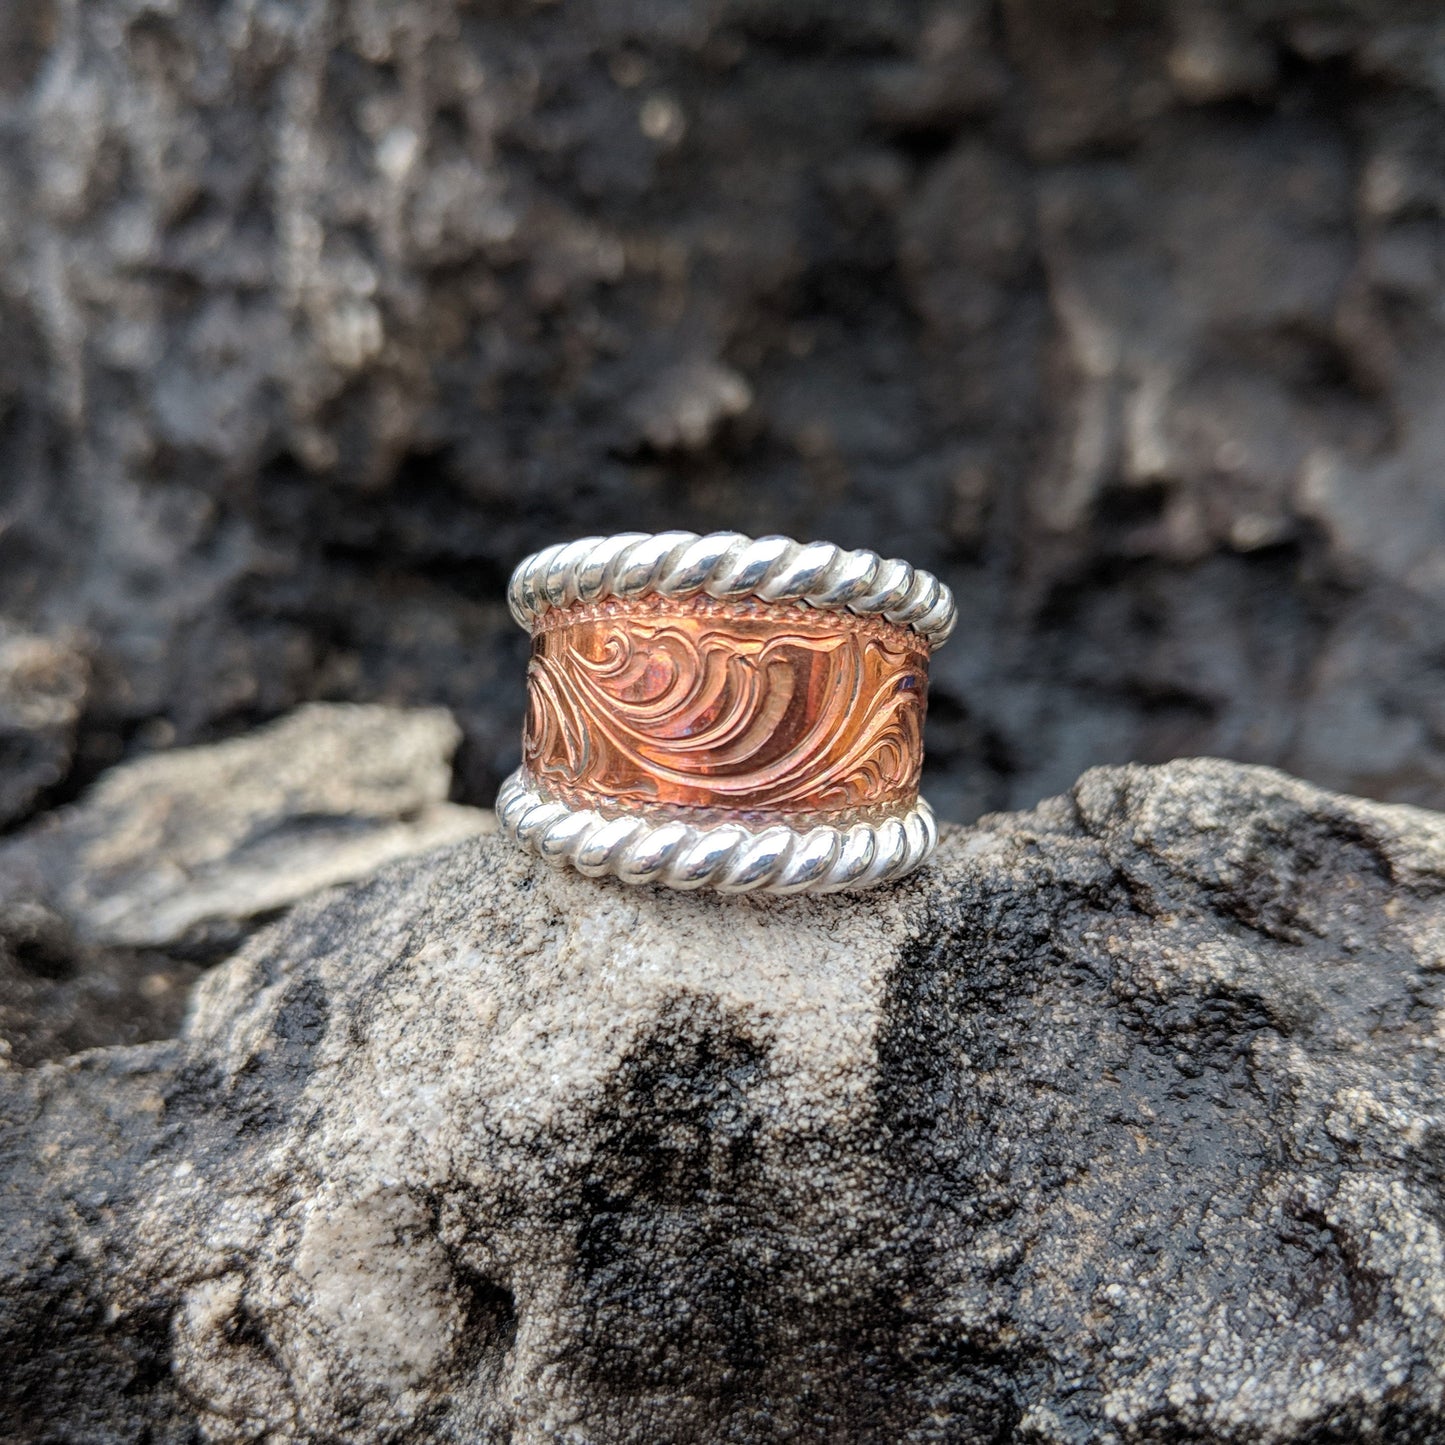 Copper Hand-Engraved Leaf Design, Sterling Silver Rope Edge, Western Band Ring Design RNG00031 by Loreena Rose